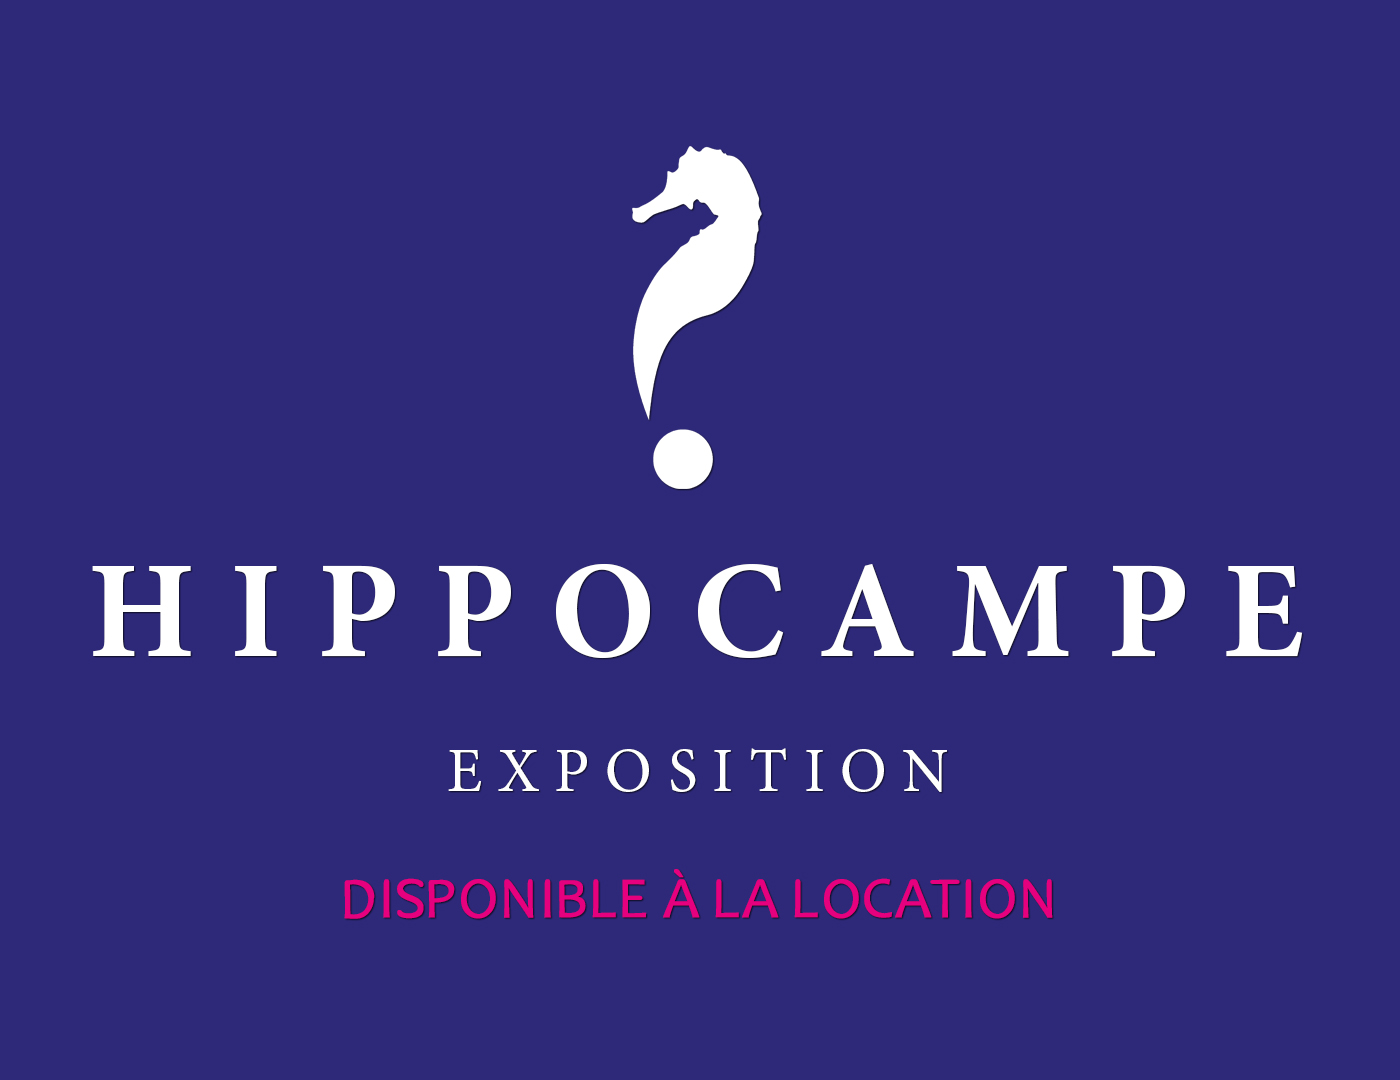 image accueil exposition hippocampe